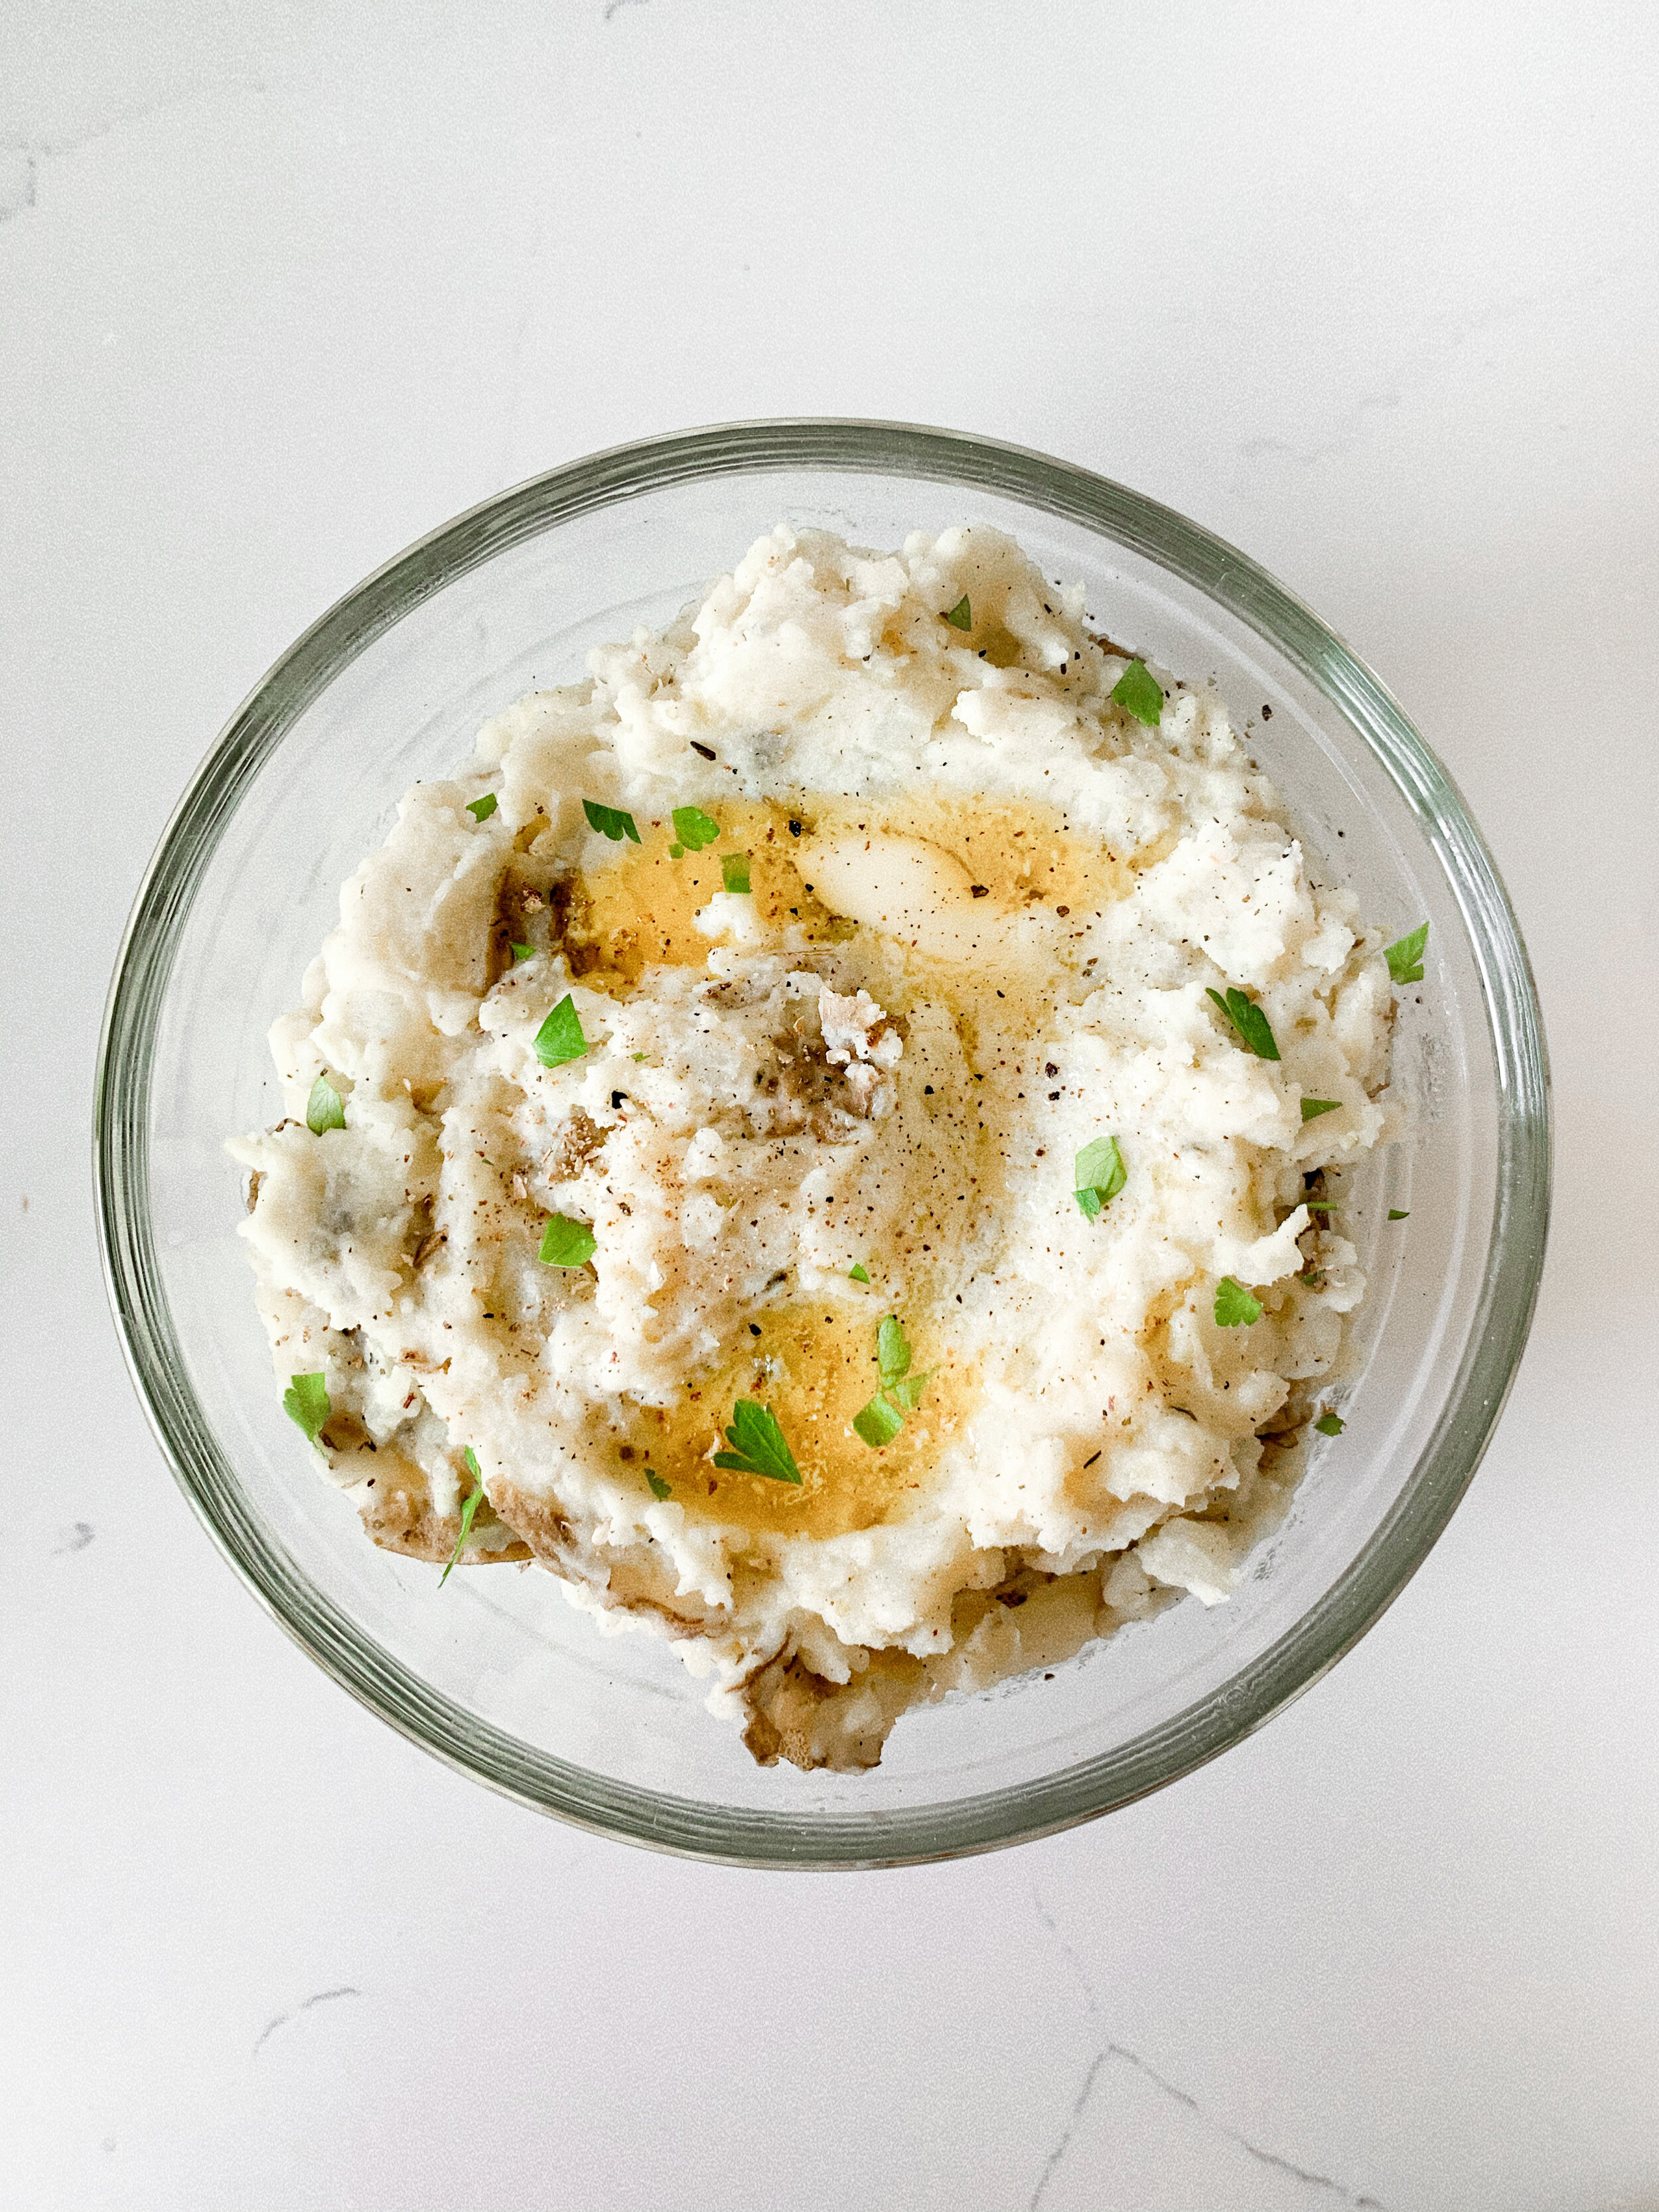 The plated 4-ingredient mashed potatoes topped with melted butter and parsley